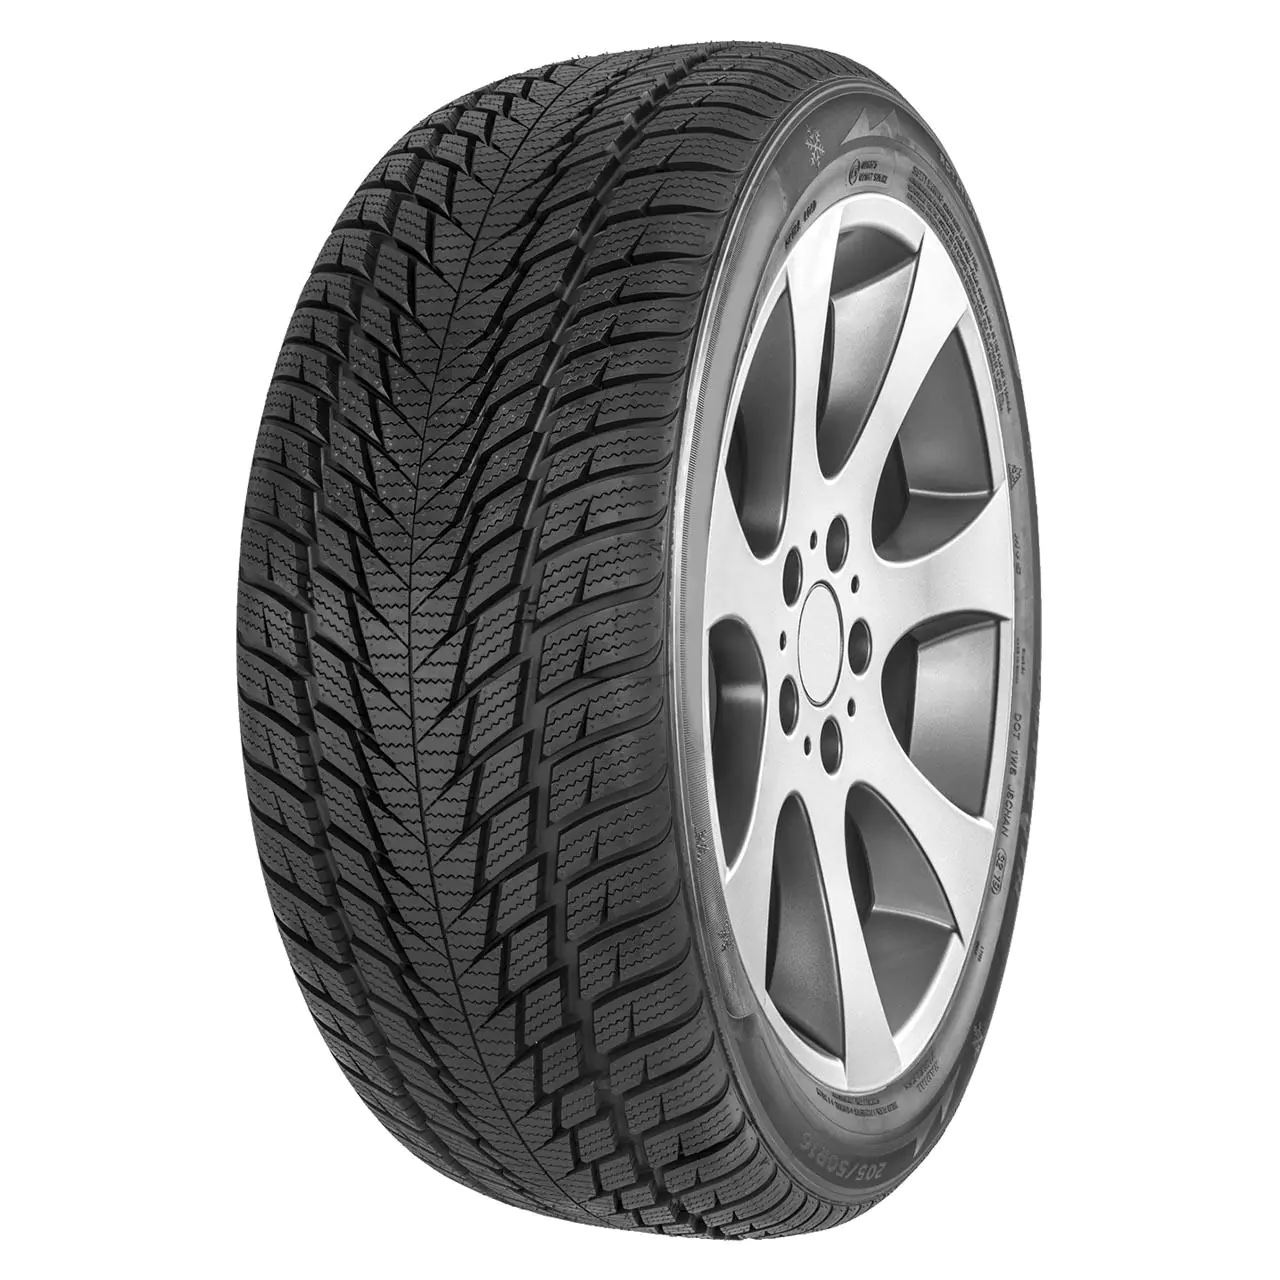 Gomme Autovettura Fortuna 235/35 R19 91V GOWIN UHP2 XL M+S Invernale